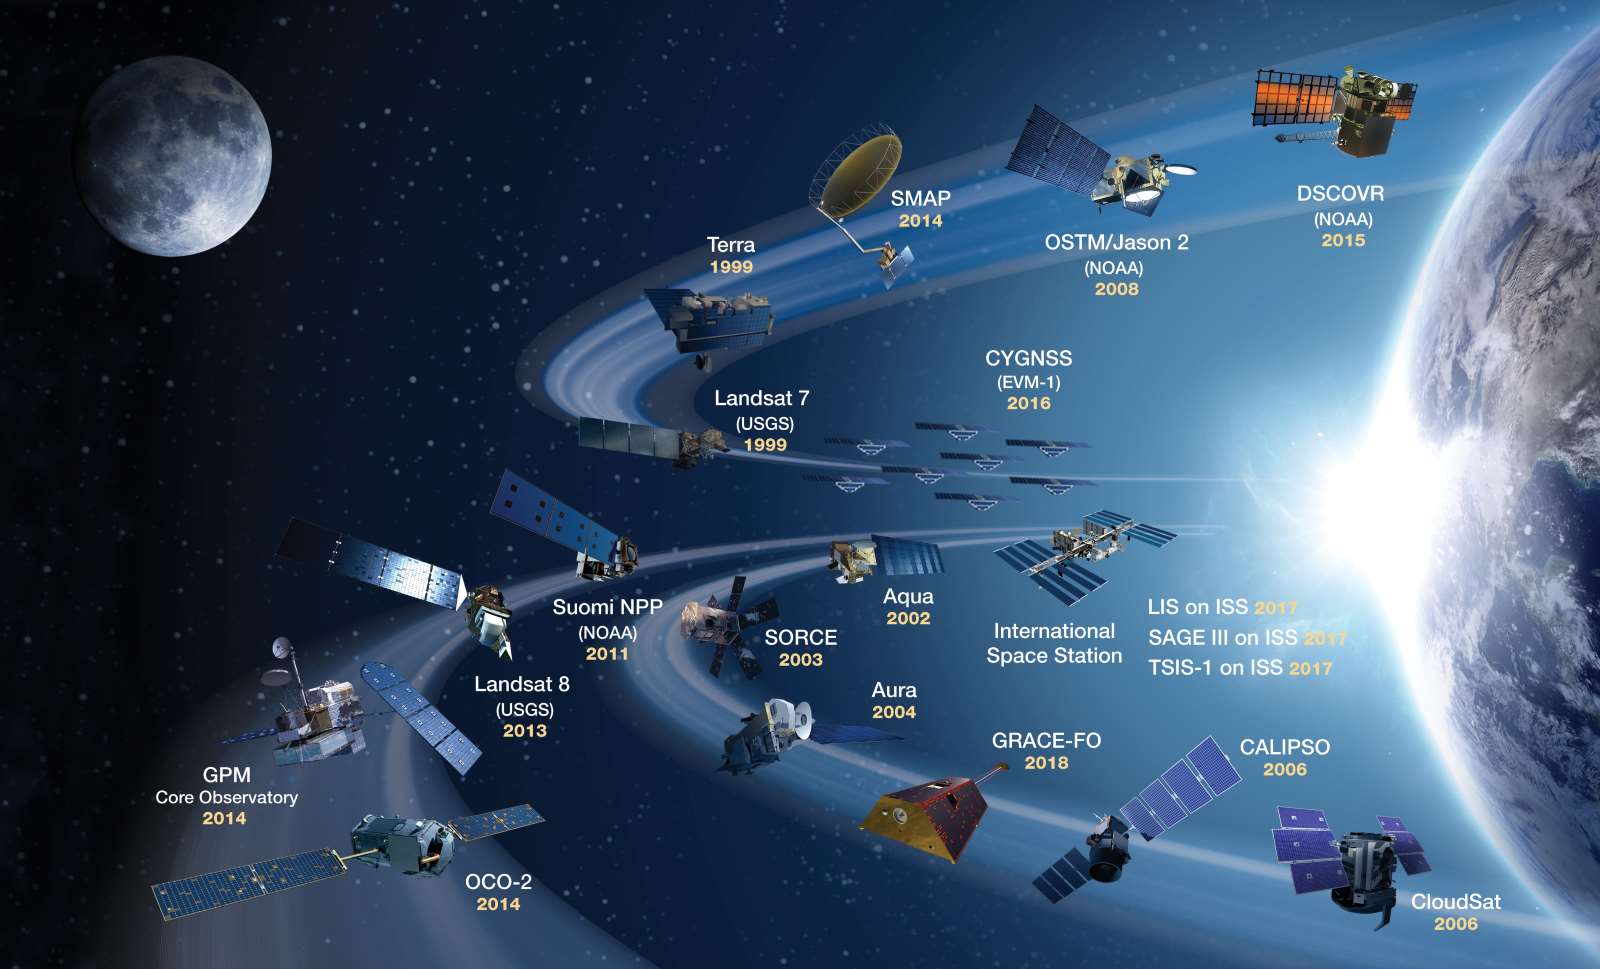 NASA's current (as of October 2018) Earth-observing satellite fleet with launch dates